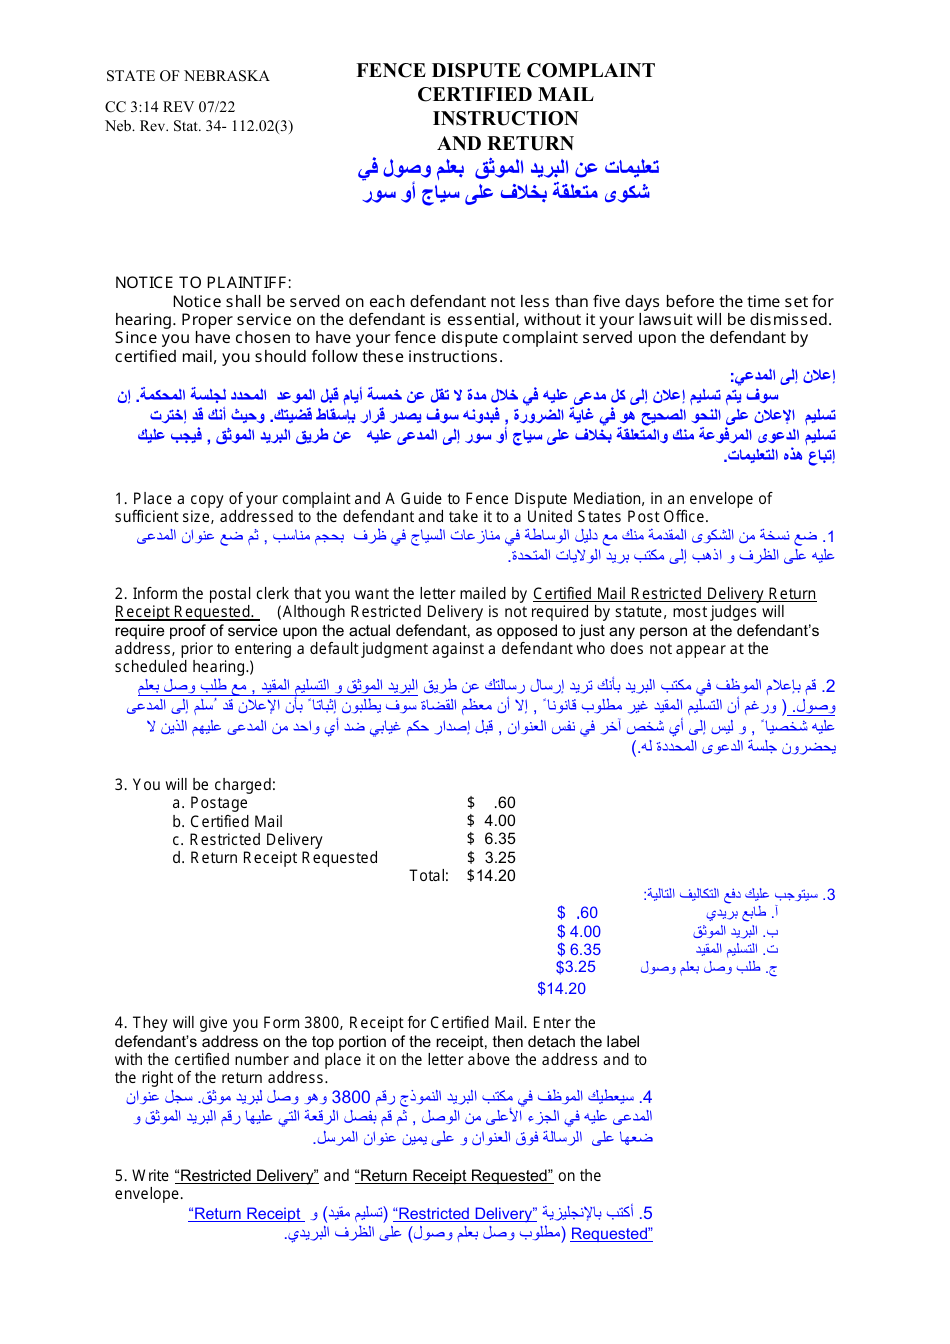 Form CC3:14 Fence Dispute Complaint Certified Mail Instruction and Return - Nebraska (English / Arabic), Page 1